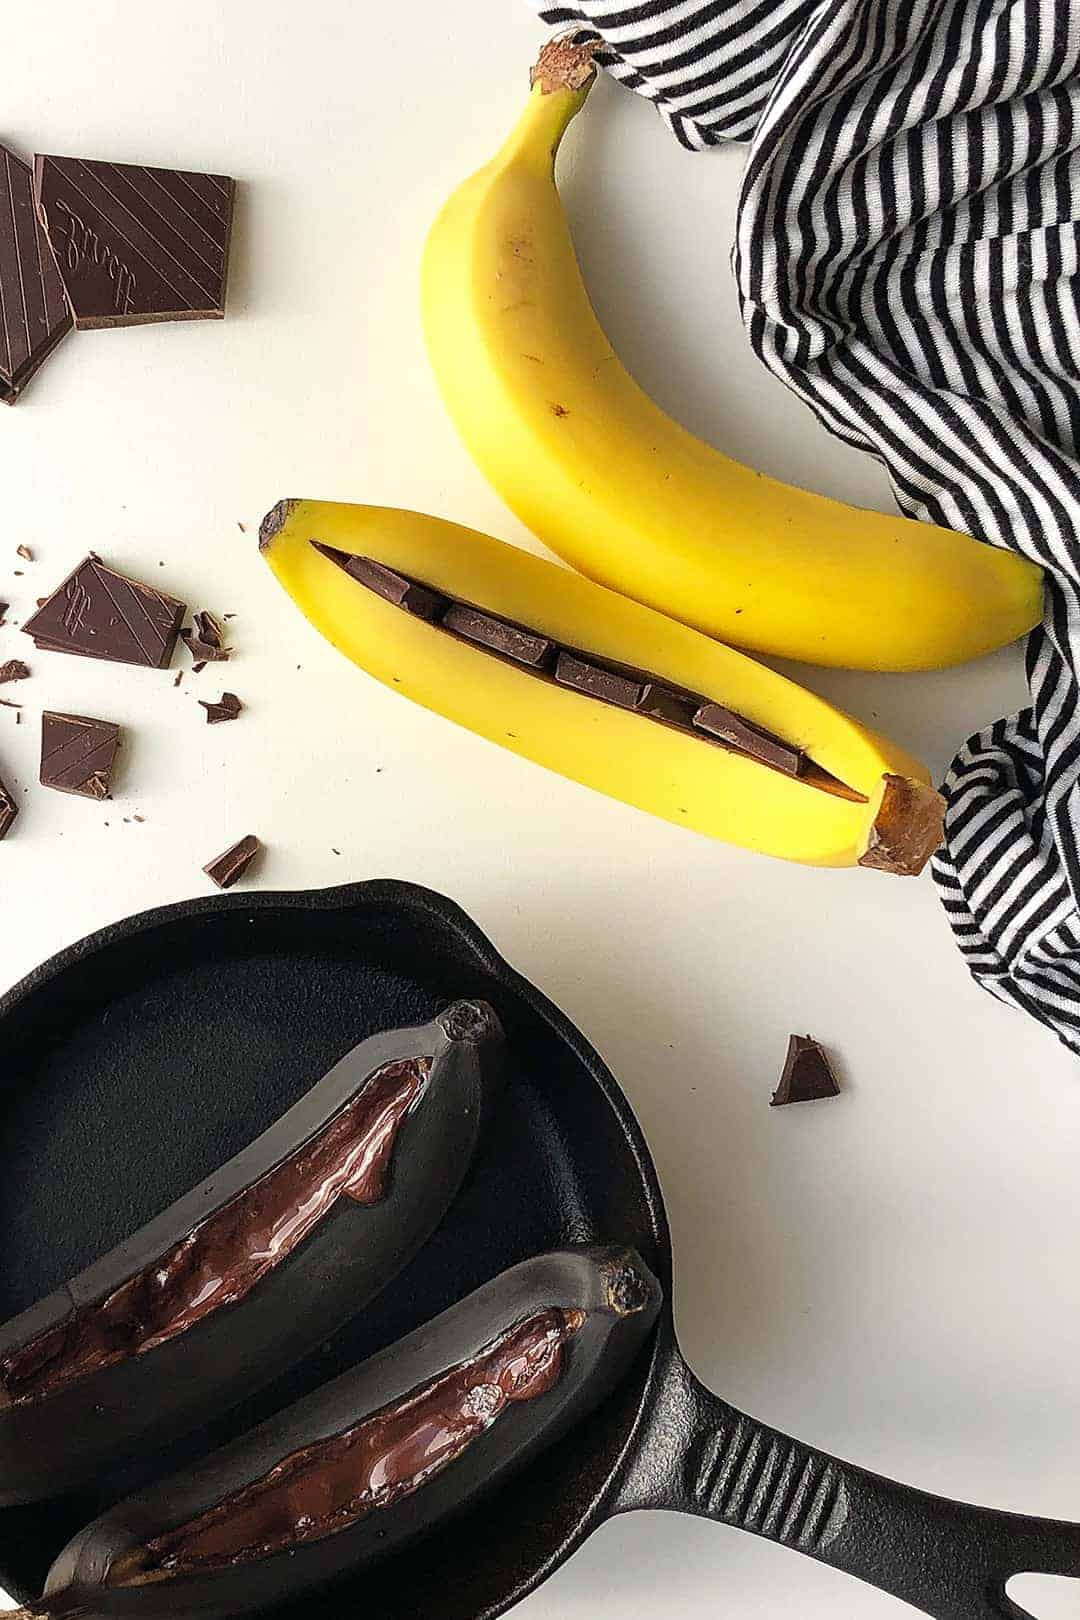 Chocolate Baked Bananas in the Oven